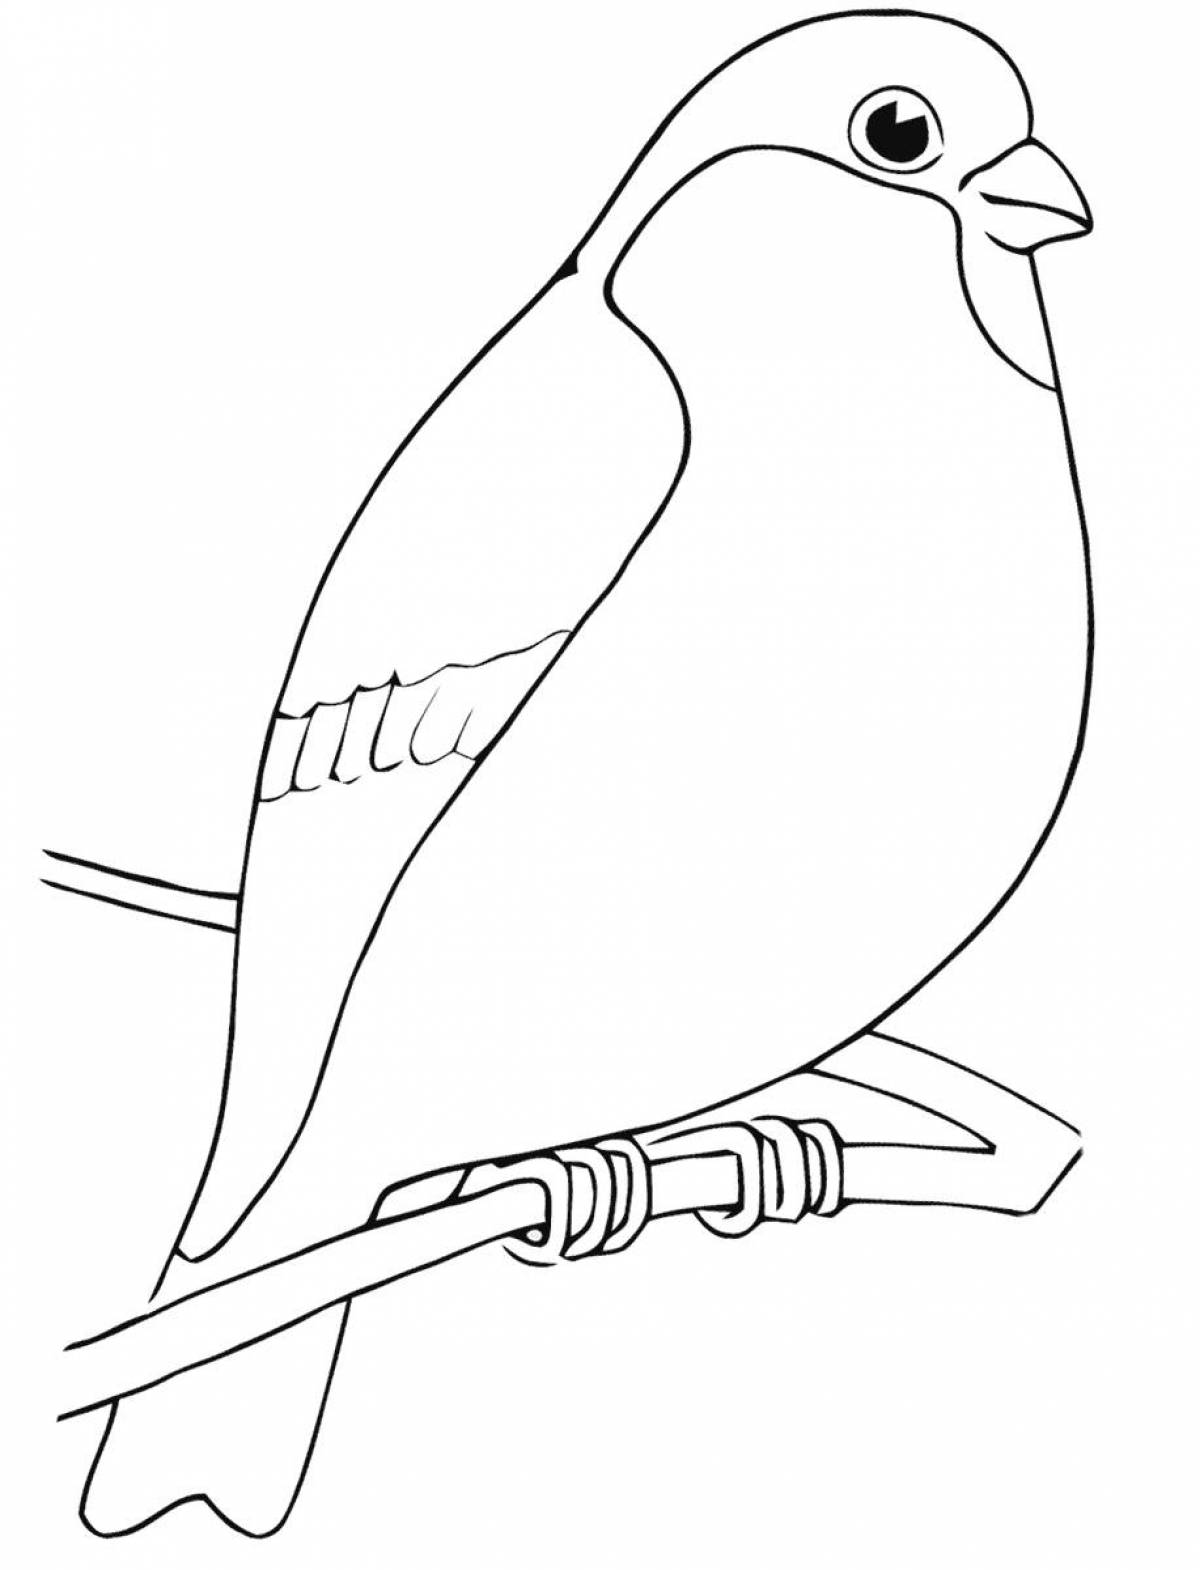 Amazing coloring pages of wintering birds for children 4-5 years old